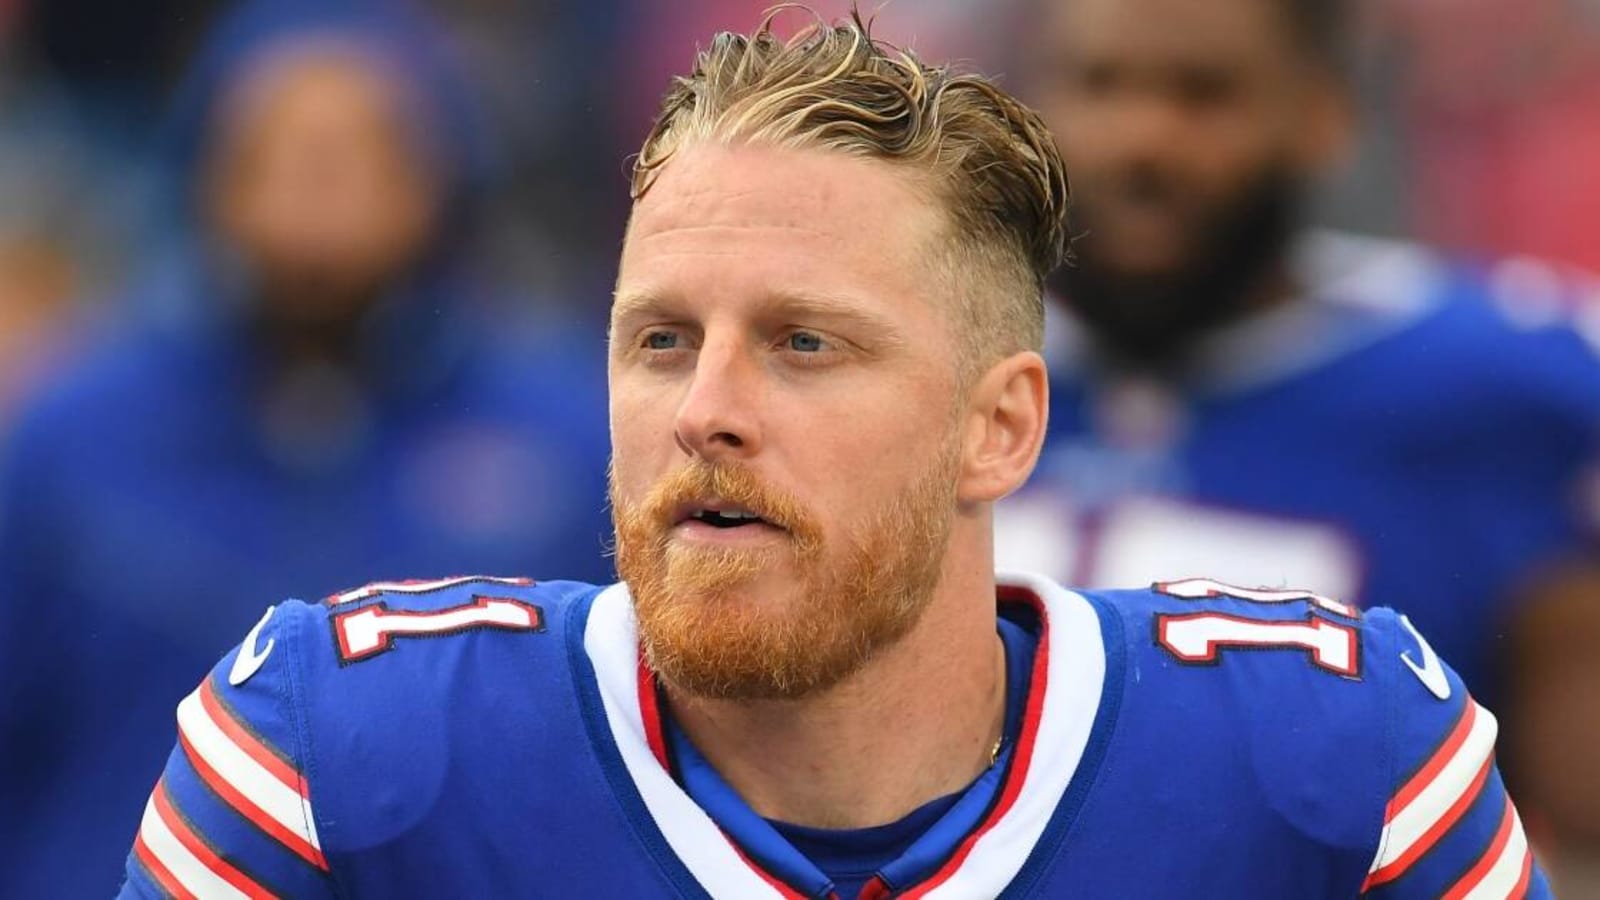 Former Dallas Cowboys wide receiver Cole Beasley sticks up for free agent T.Y. Hilton